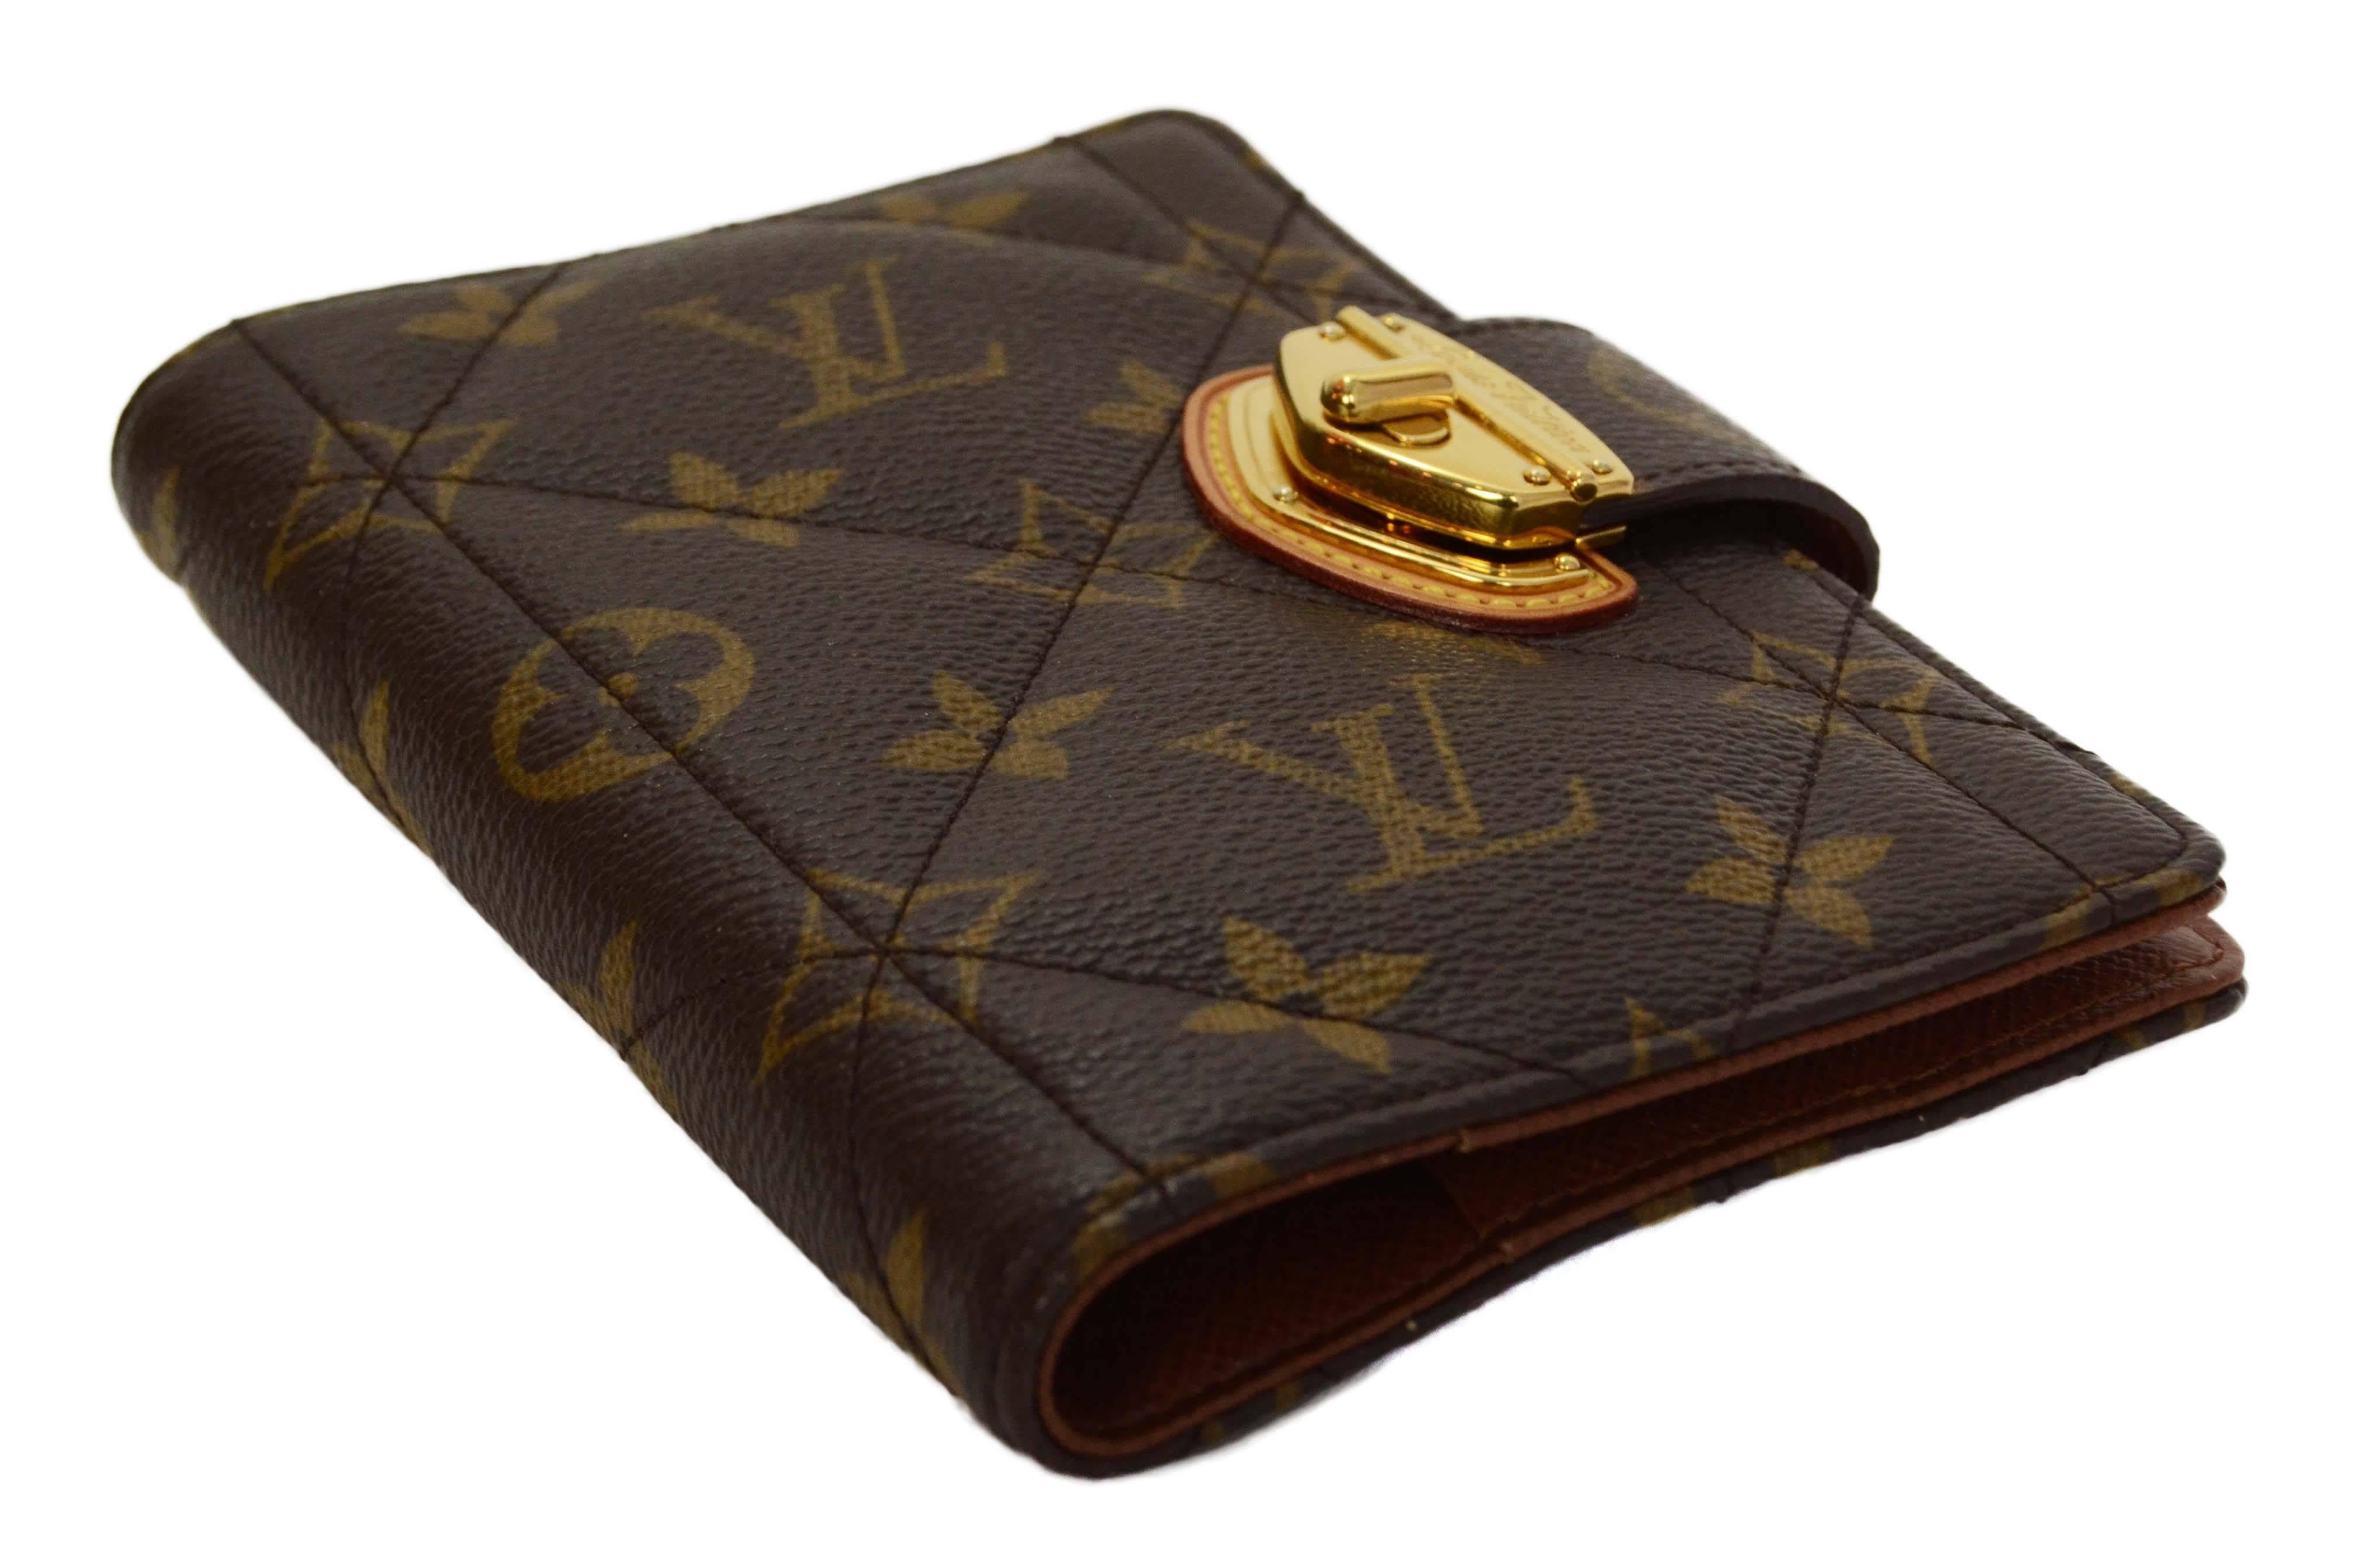 Louis Vuitton Monogram Canvas Etoile Small Agenda Cover 
Features quilting throughout canvas
Made In: France
Year of Production: 2009
Color: Brown
Hardware: Goldtone
Materials: Coated canvas
Lining: Brown coated canvas
Closure/Opening: